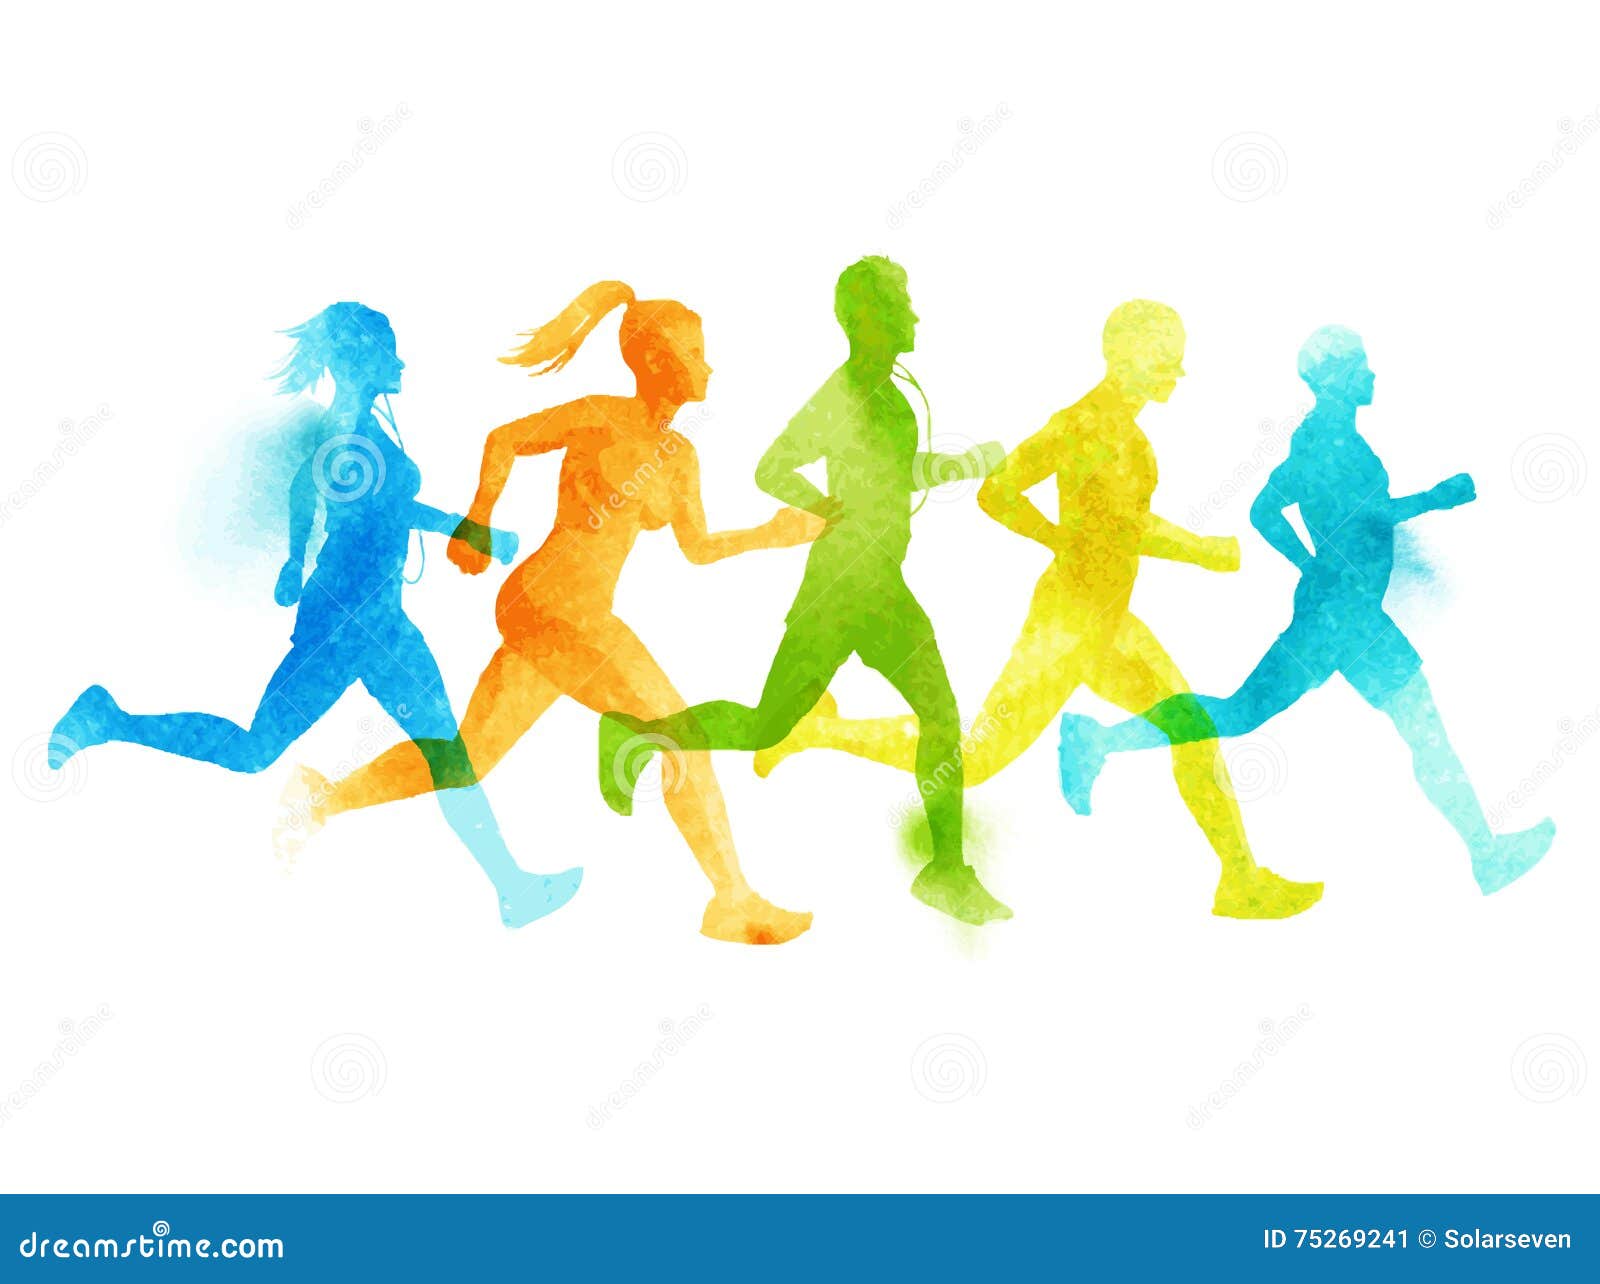 a running group of active people